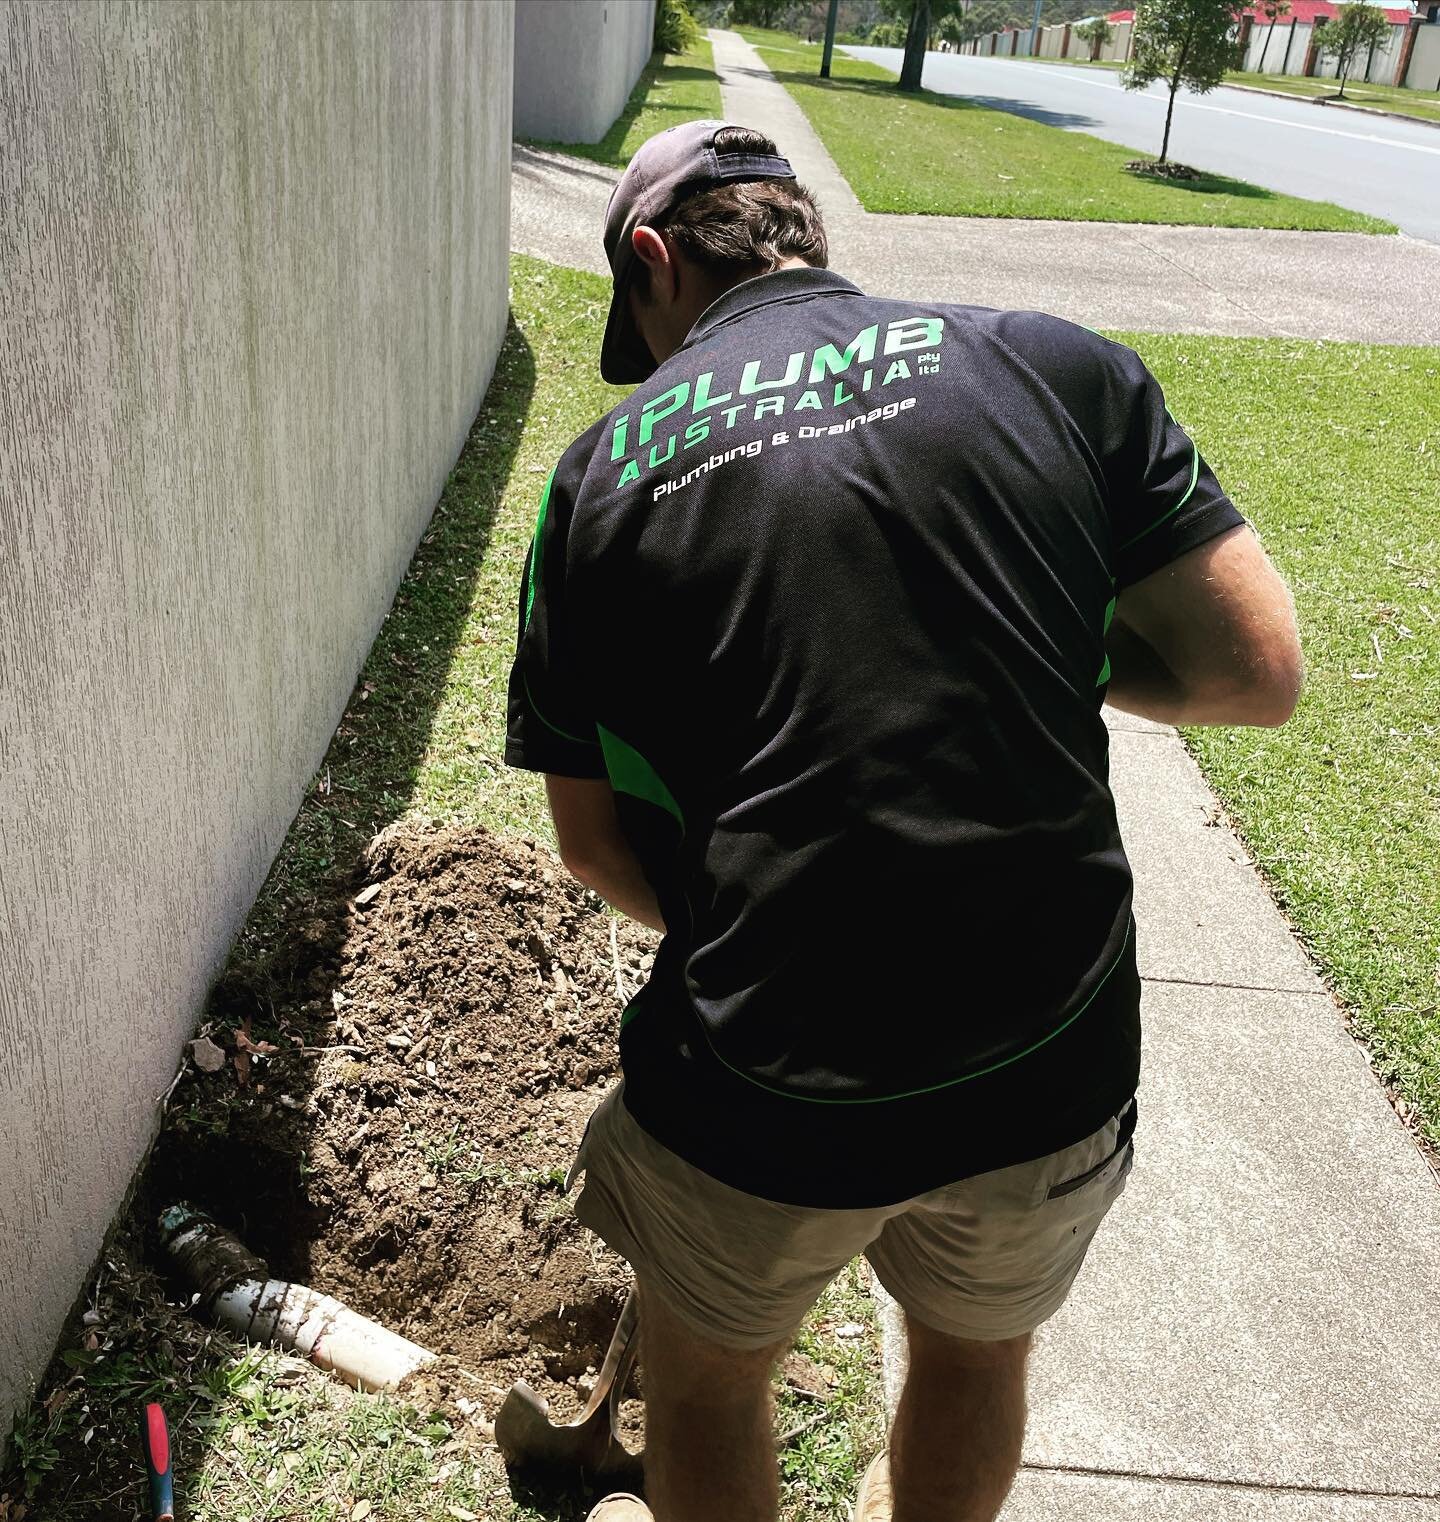 Getting it done in the heat with this small stormwater repair today.
🥵🥵 🔥 ✅